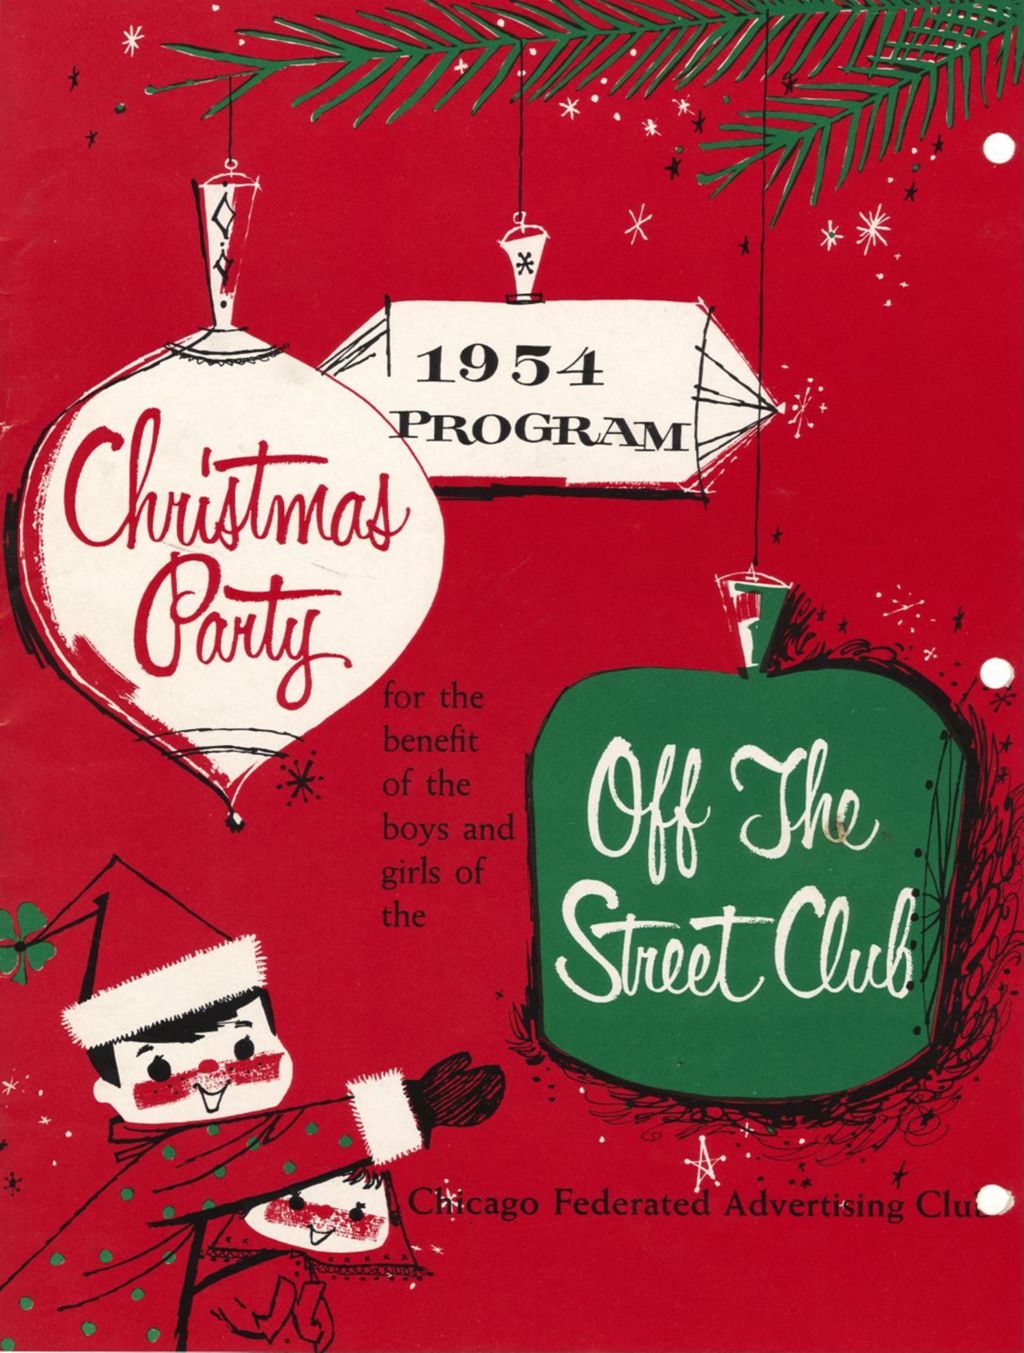 Miniature of Christmas Party Benefit program for Off-The-Street Club